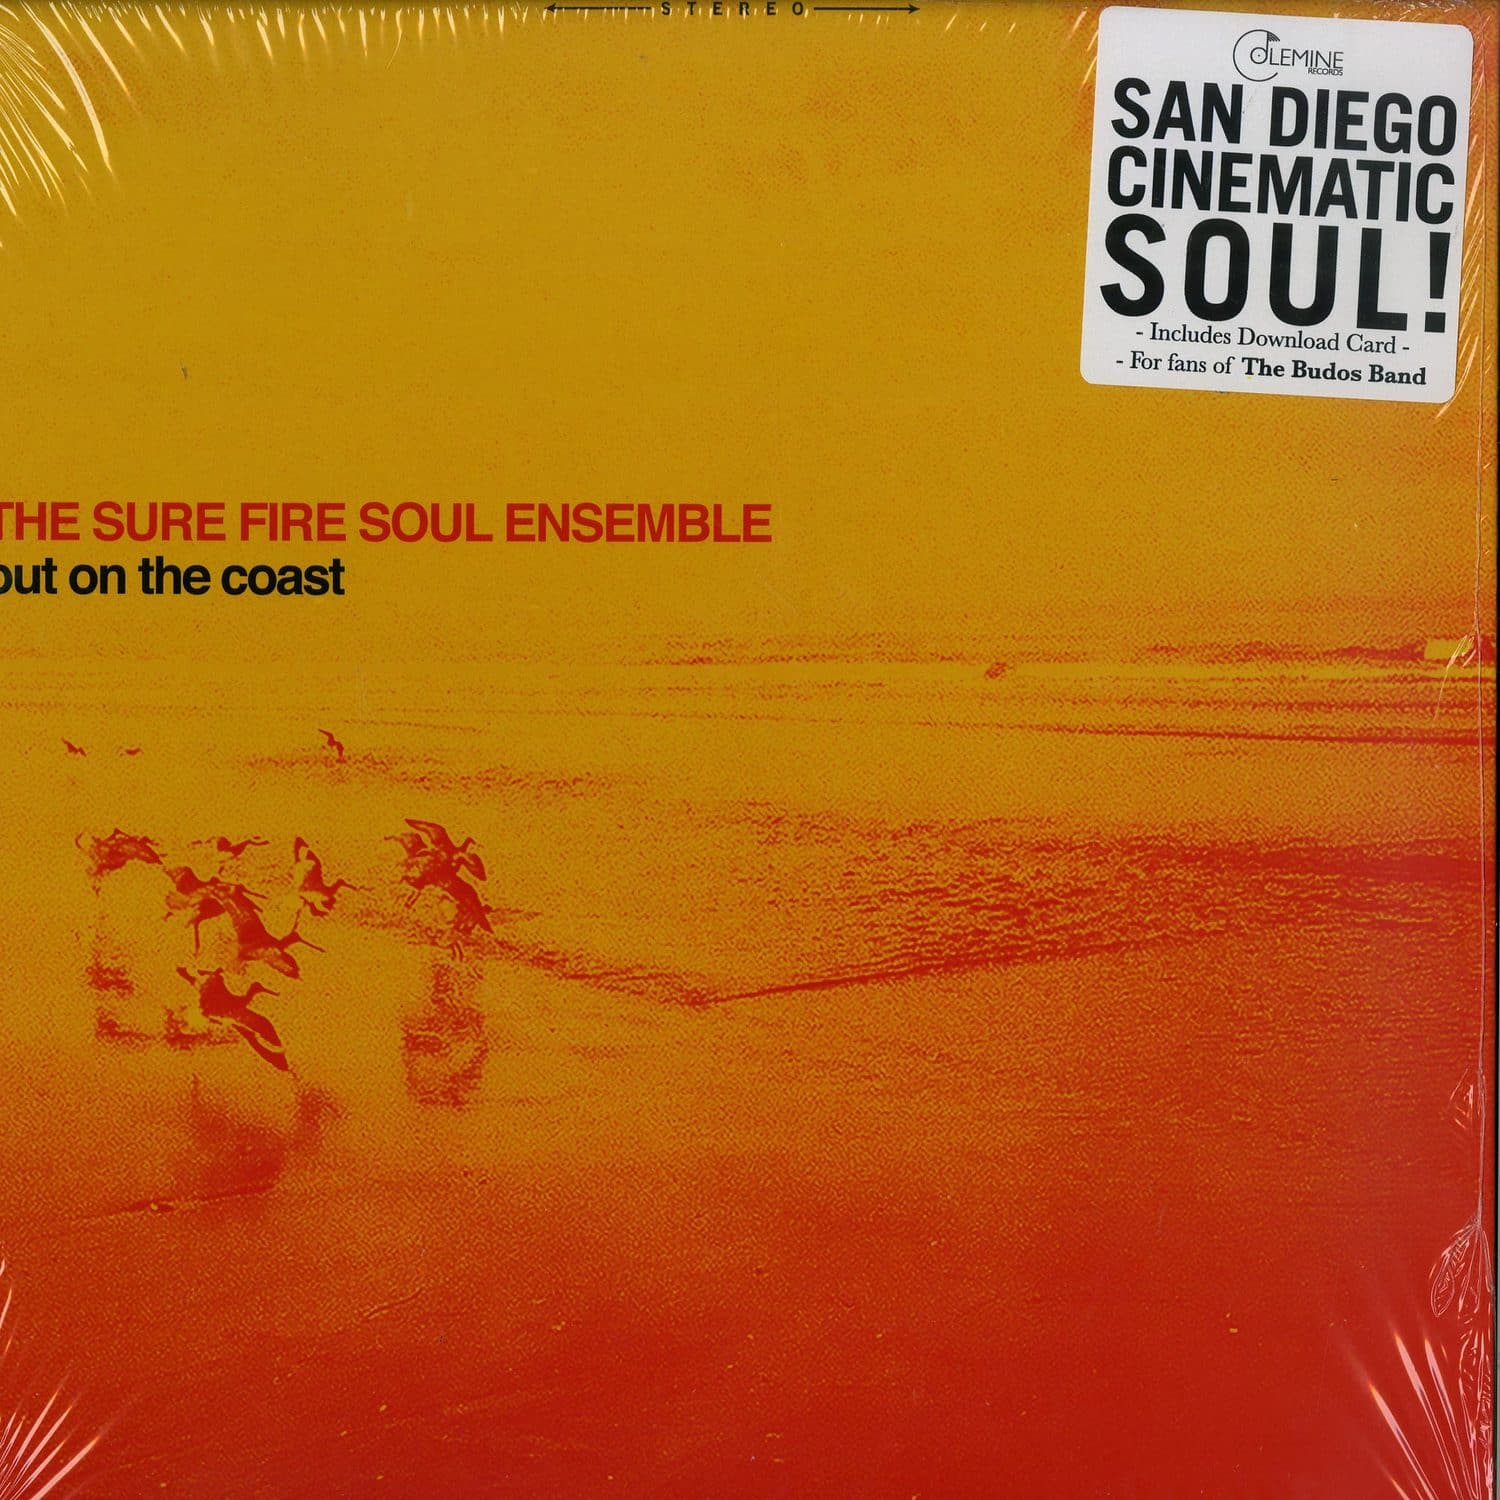 The Sure Fire Soul Ensemble - OUT ON THE COAST 